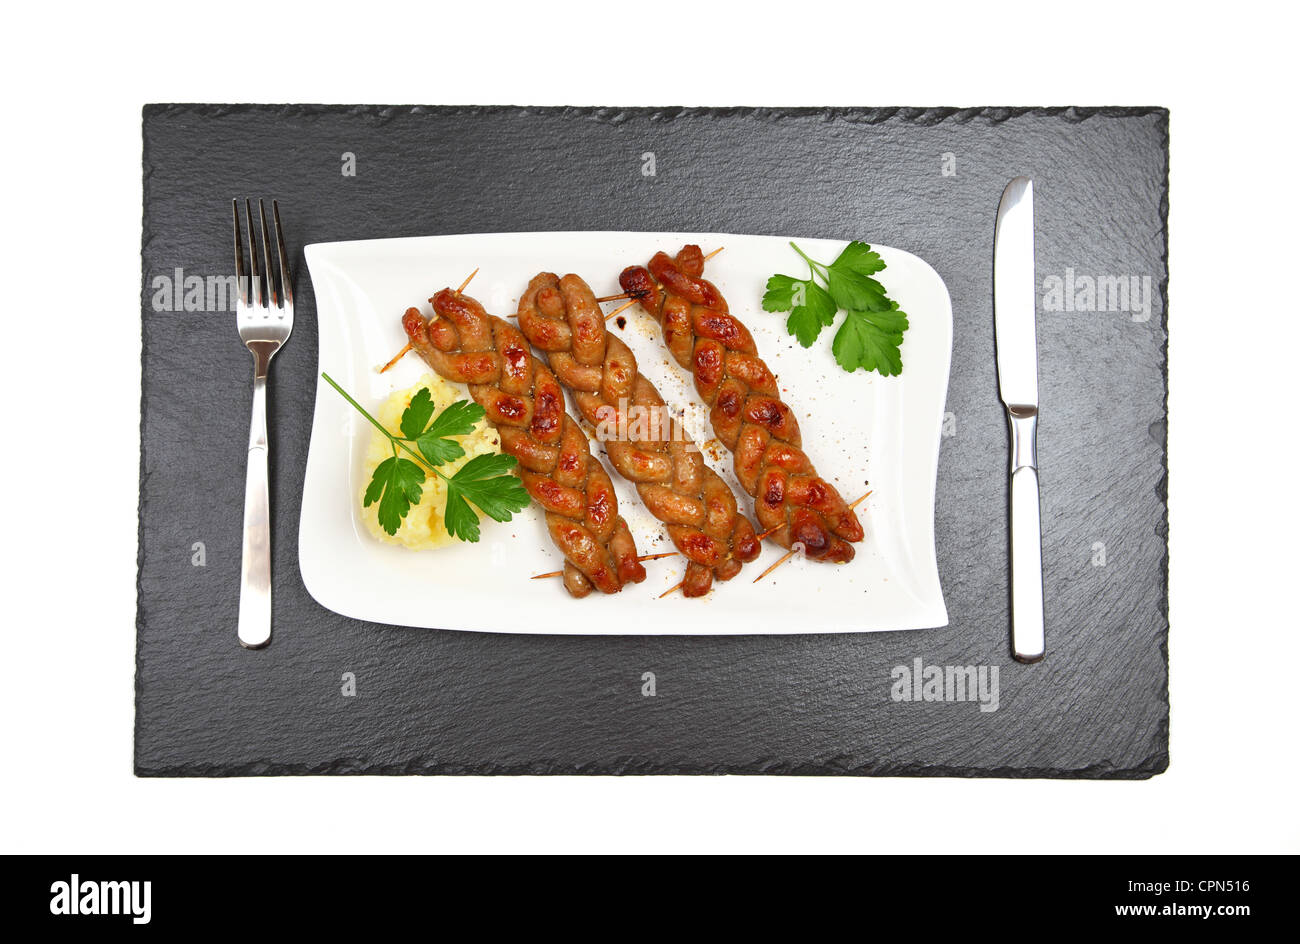 Bratwurst - fried sausage with mashed potatoes - top view Stock Photo